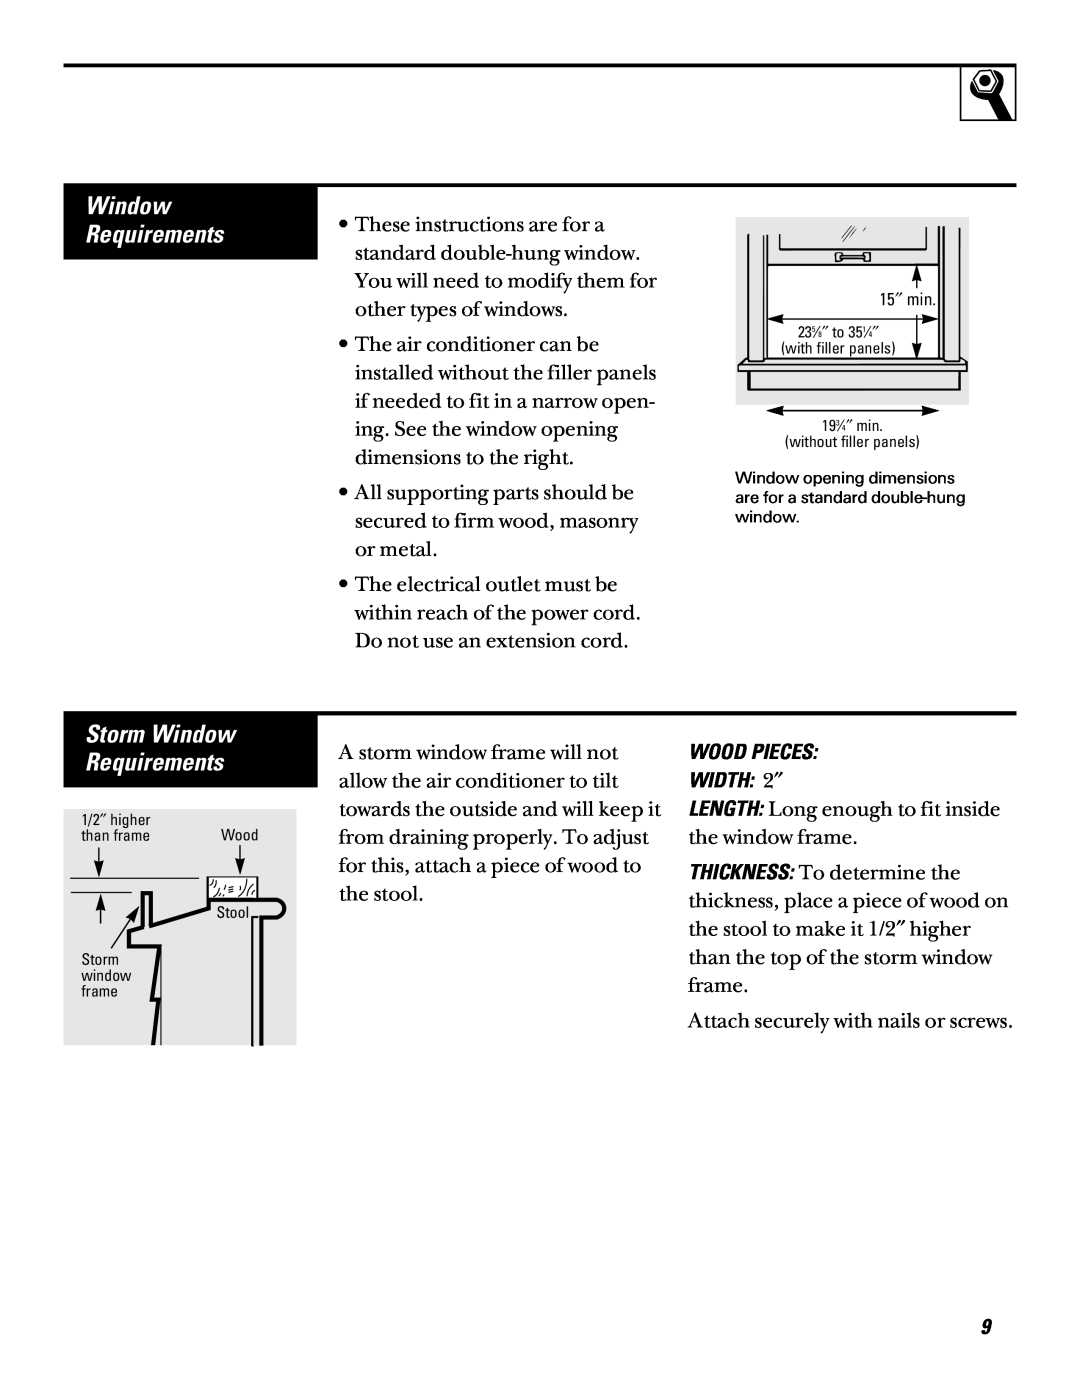 GE AQV06, AQV05 installation instructions Storm Window Requirements, WOOD PIECES WIDTH 2″ 